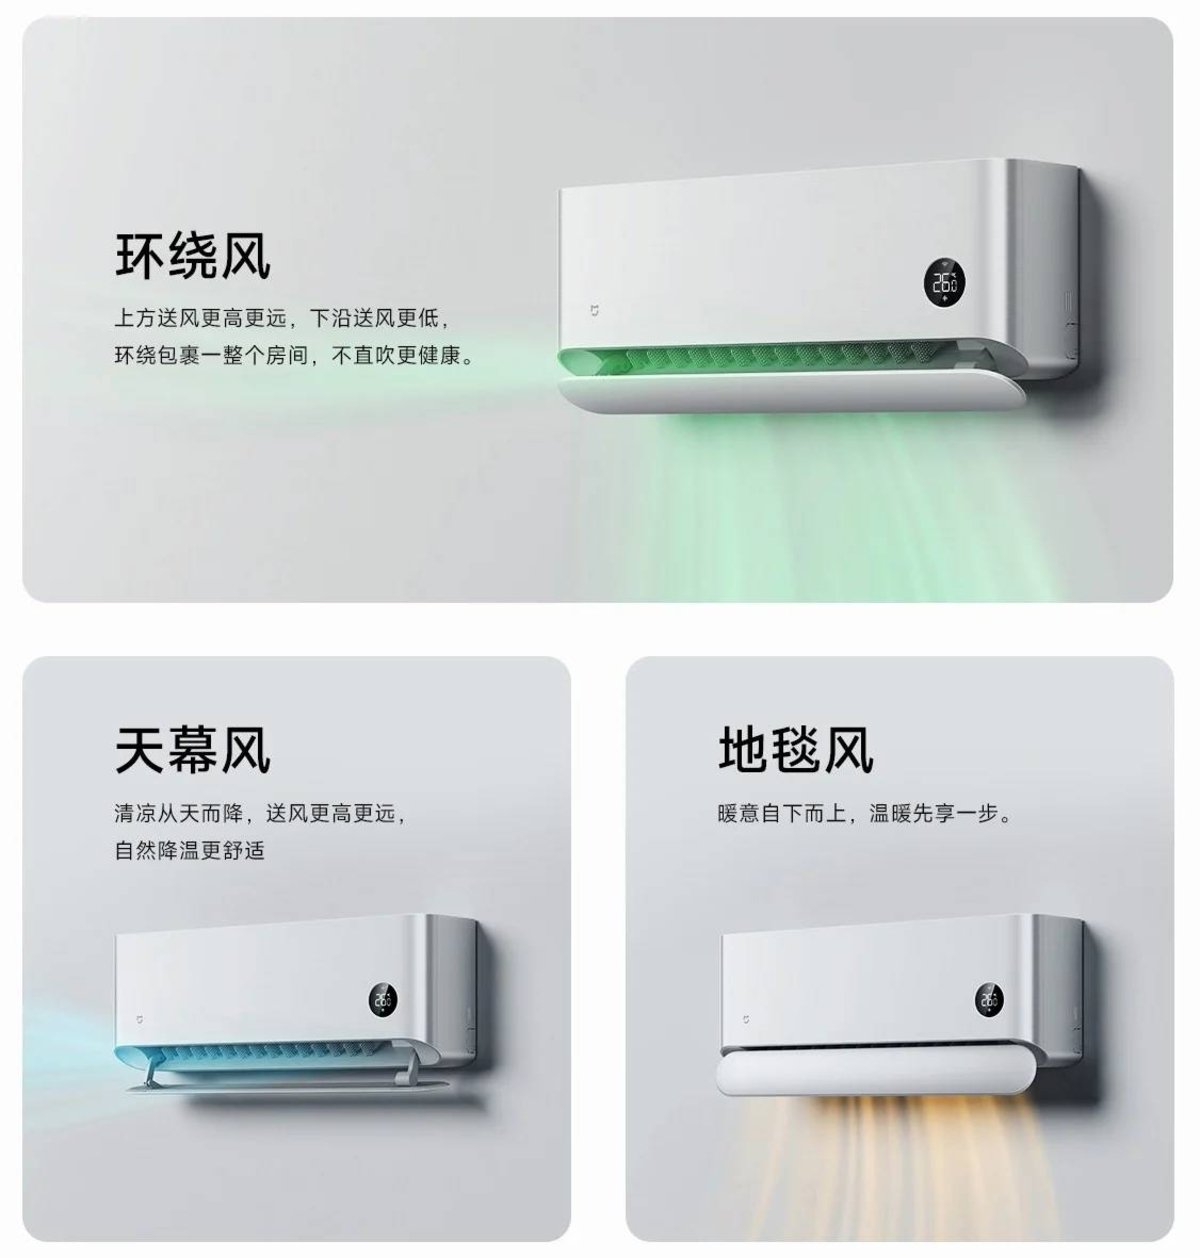 Xiaomi Mijia Air Conditioning Natural Wind 1.5 HP specs